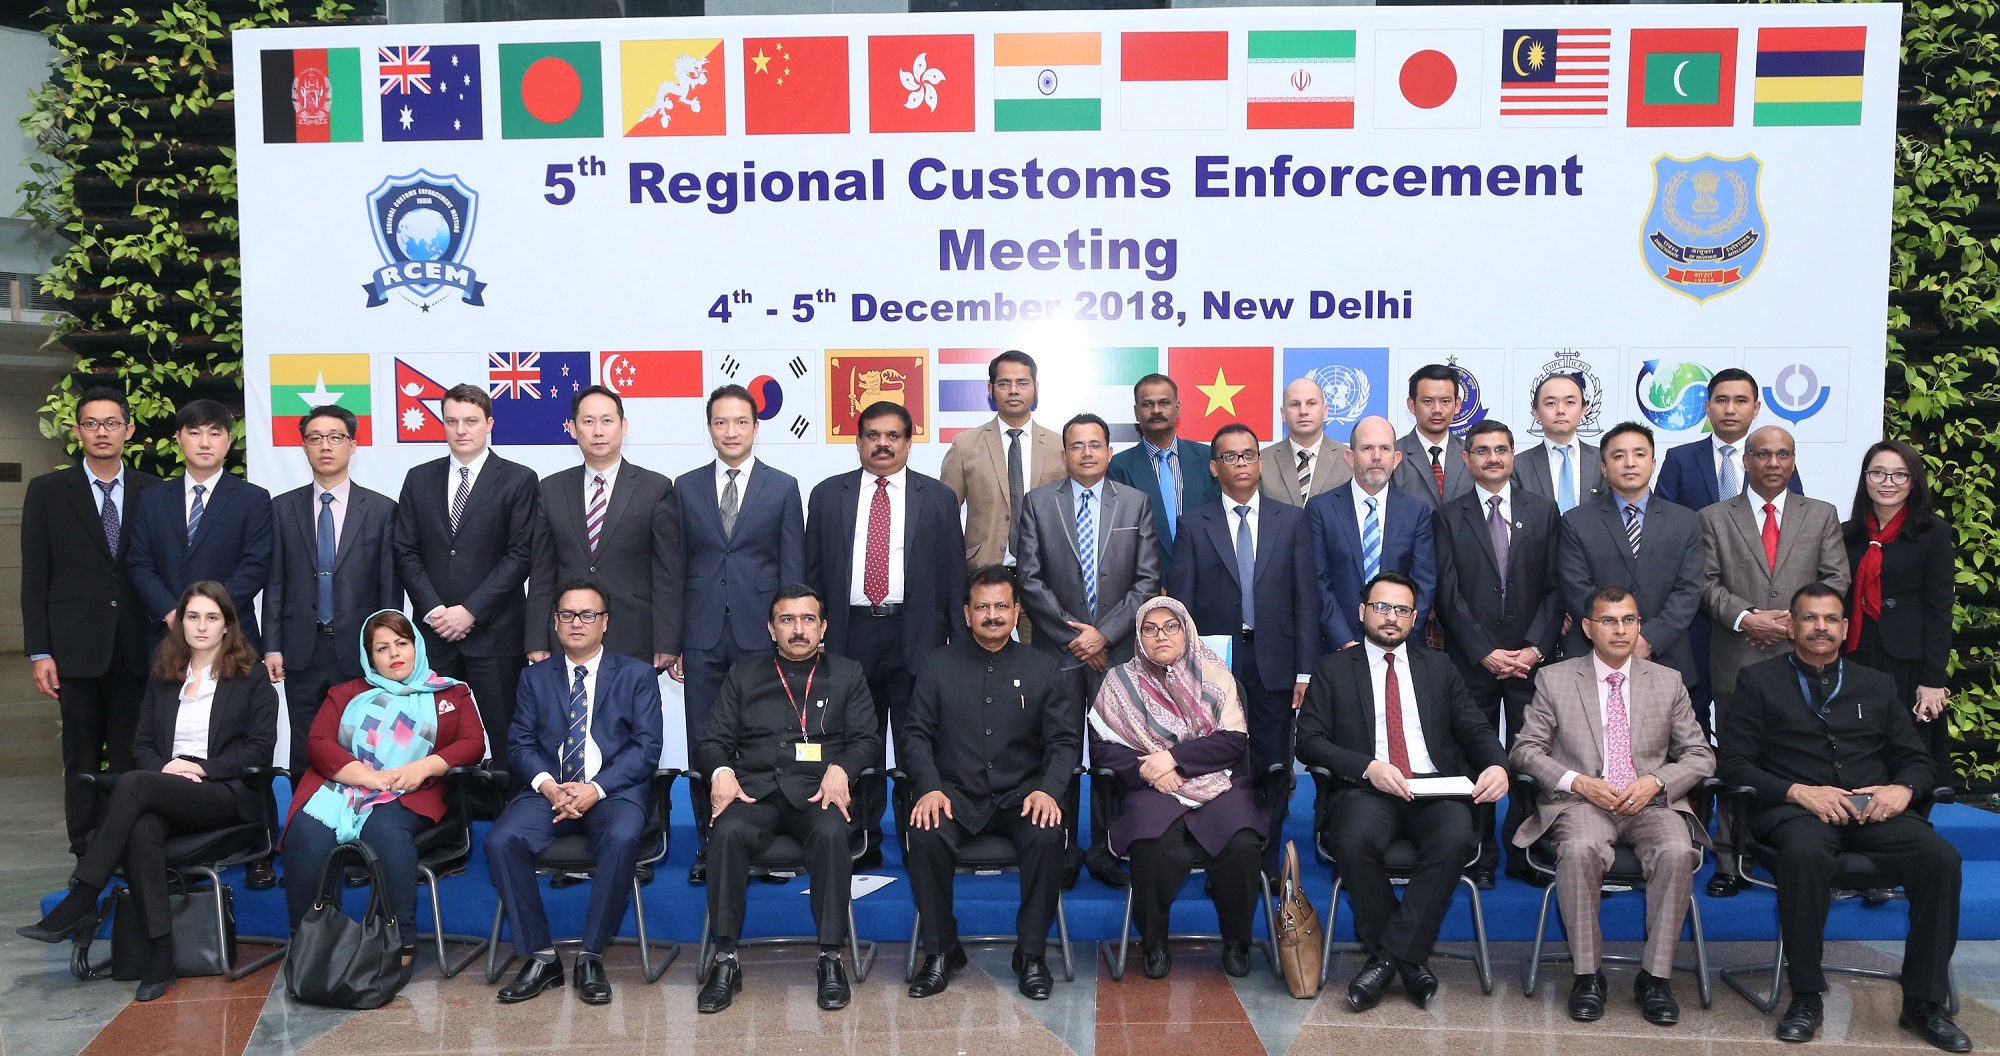 Participants from various countries on the occasion of 5th Regional Customs enforcement Meeting held on 4th – 5th December 2018 at New Delhi.